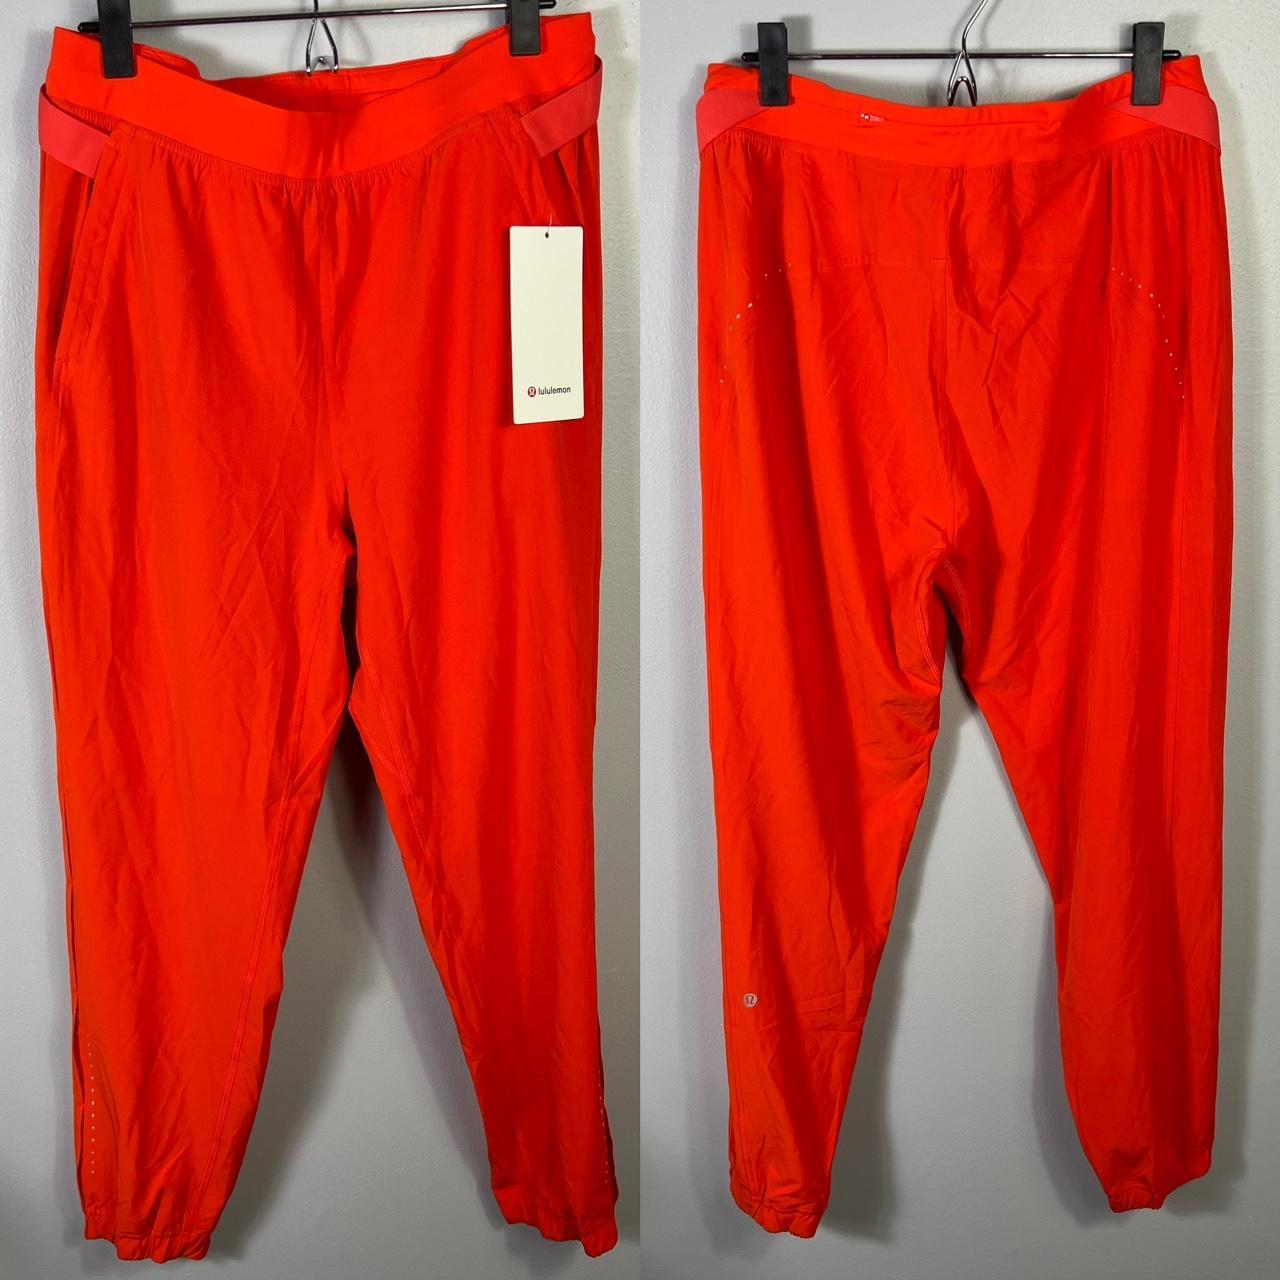 Lululemon Adapted State High-Rise Jogger Airflow - Depop